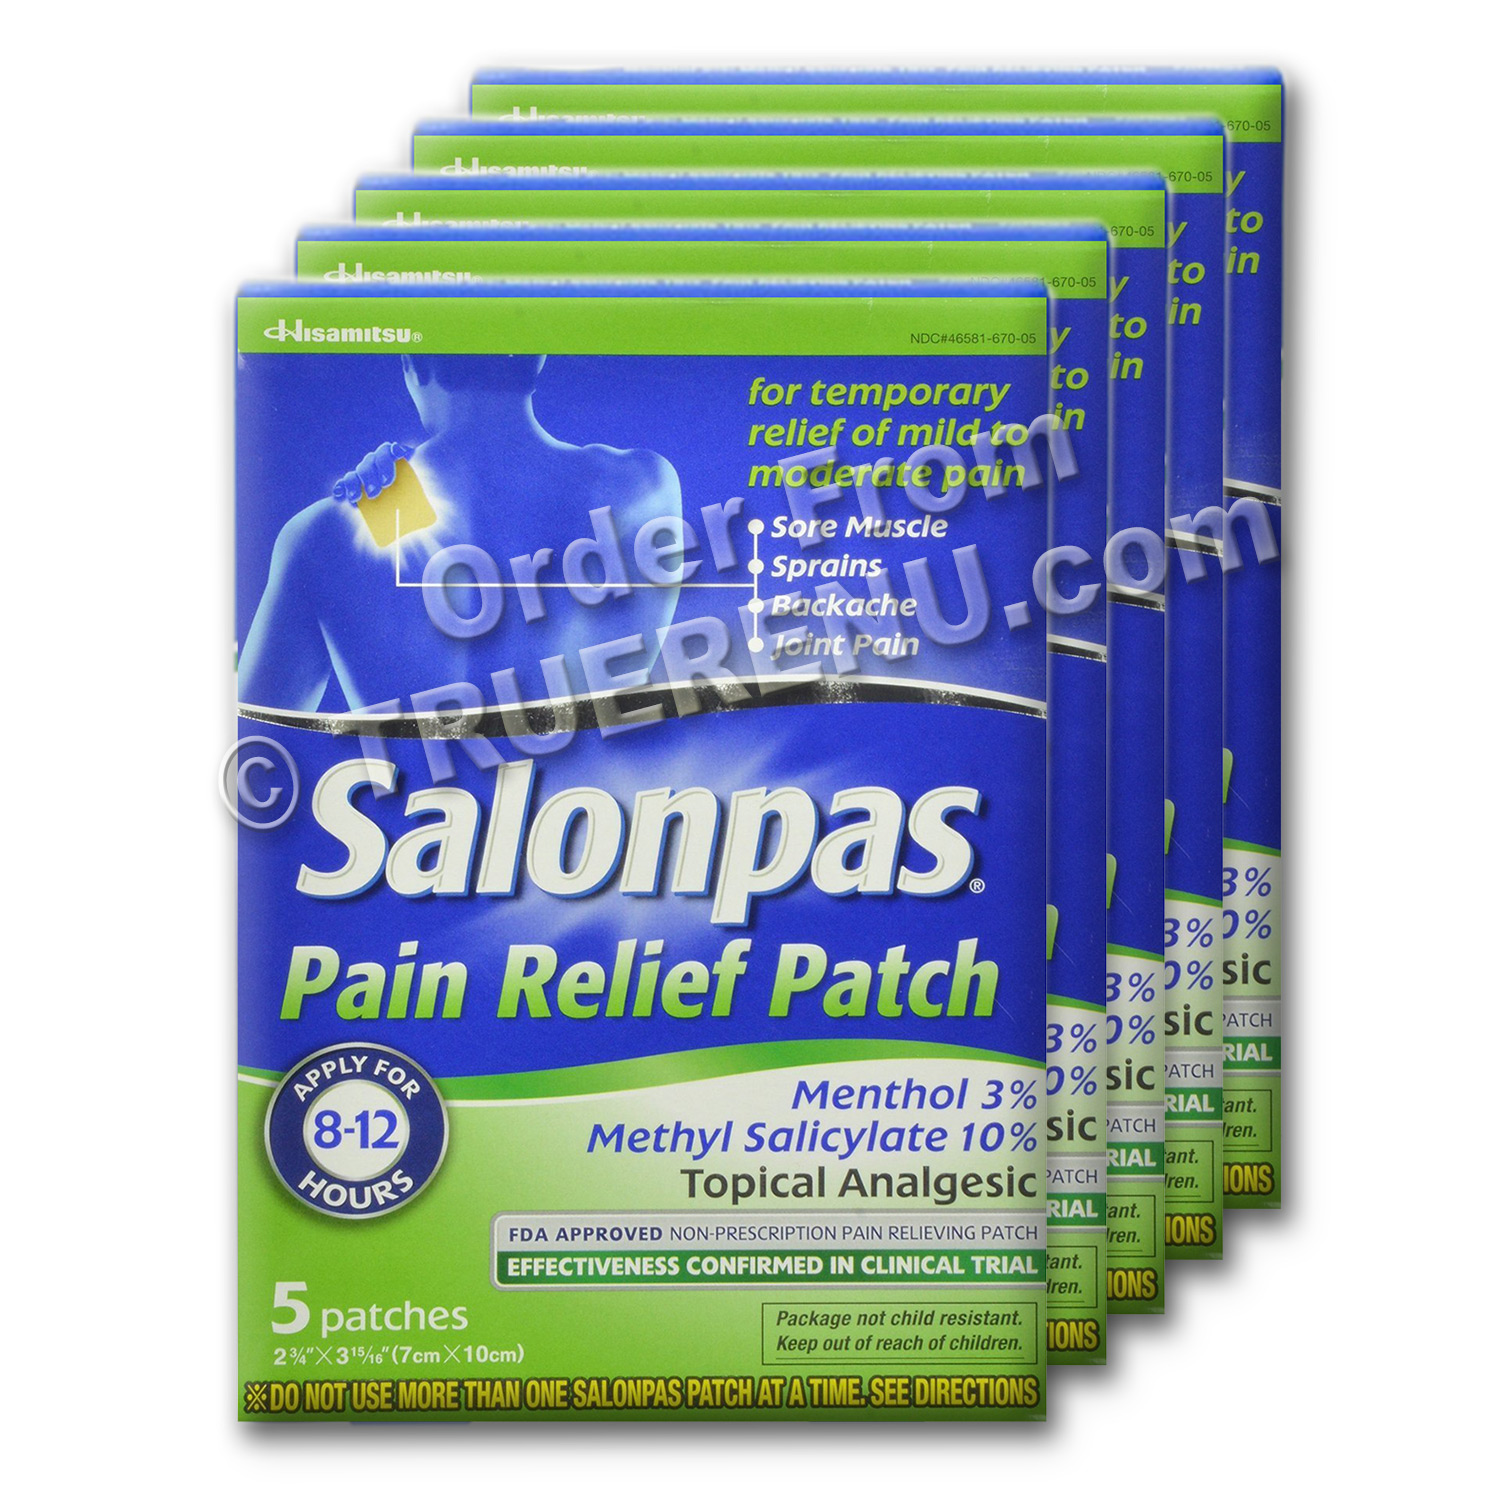 PHOTO TO COME: SALONPAS Ultrathin Pain Relief Patches - - 5 PAK of 5 = 25 total - SAVE $$$ !